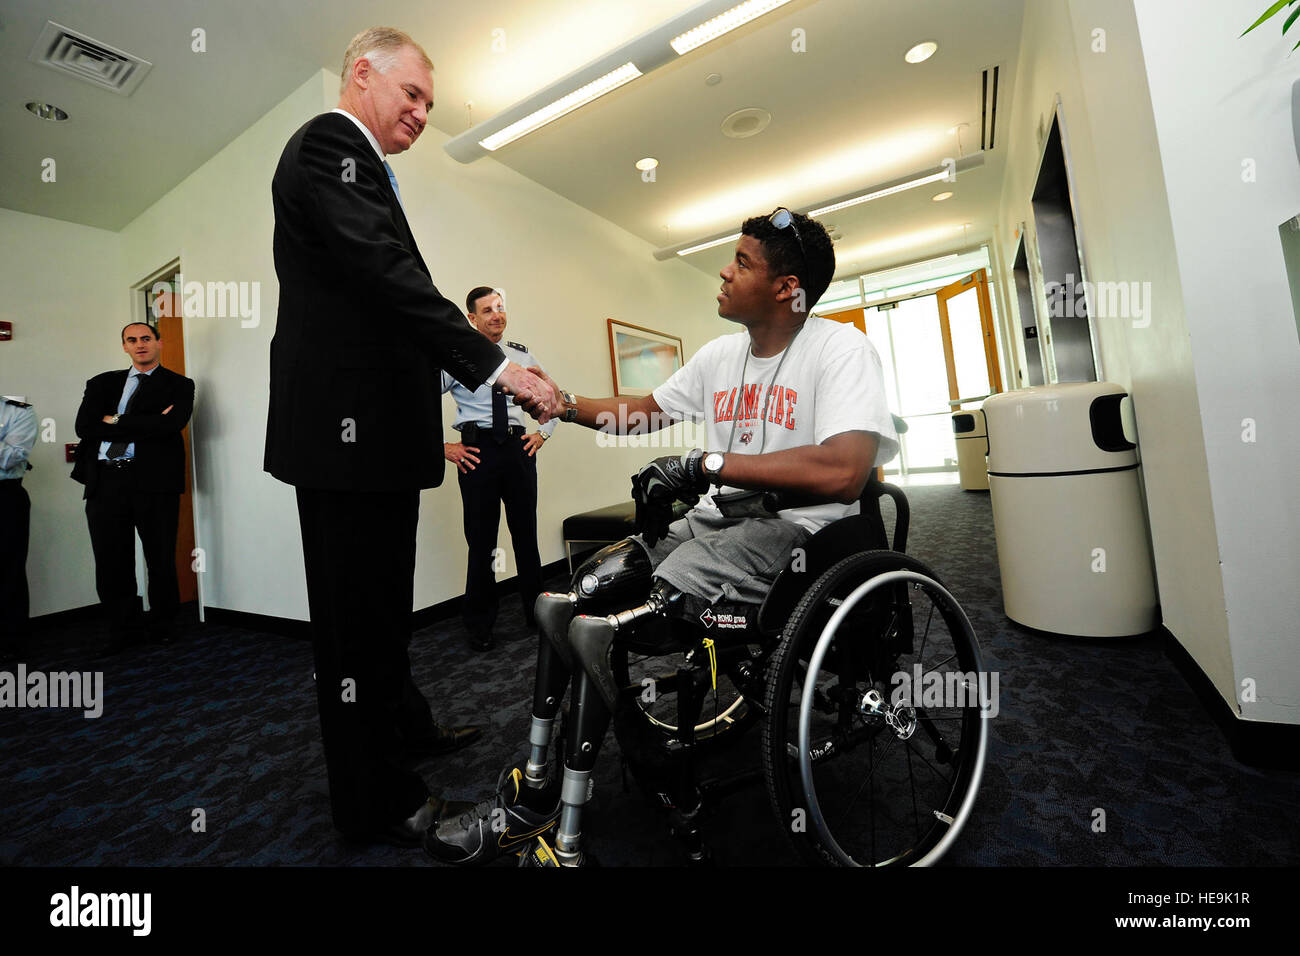 Deputy Secretary of Defense William J. Lynn III presents a coin to a wounded warrior during a visit to the Center for the Intrepid, Brooke Army Medical Center, San Antonio, Texas, Sept. 28, 2011.  Tech. Sgt. Jacob N. Bailey, U.S. Air Force) (Released) Stock Photo